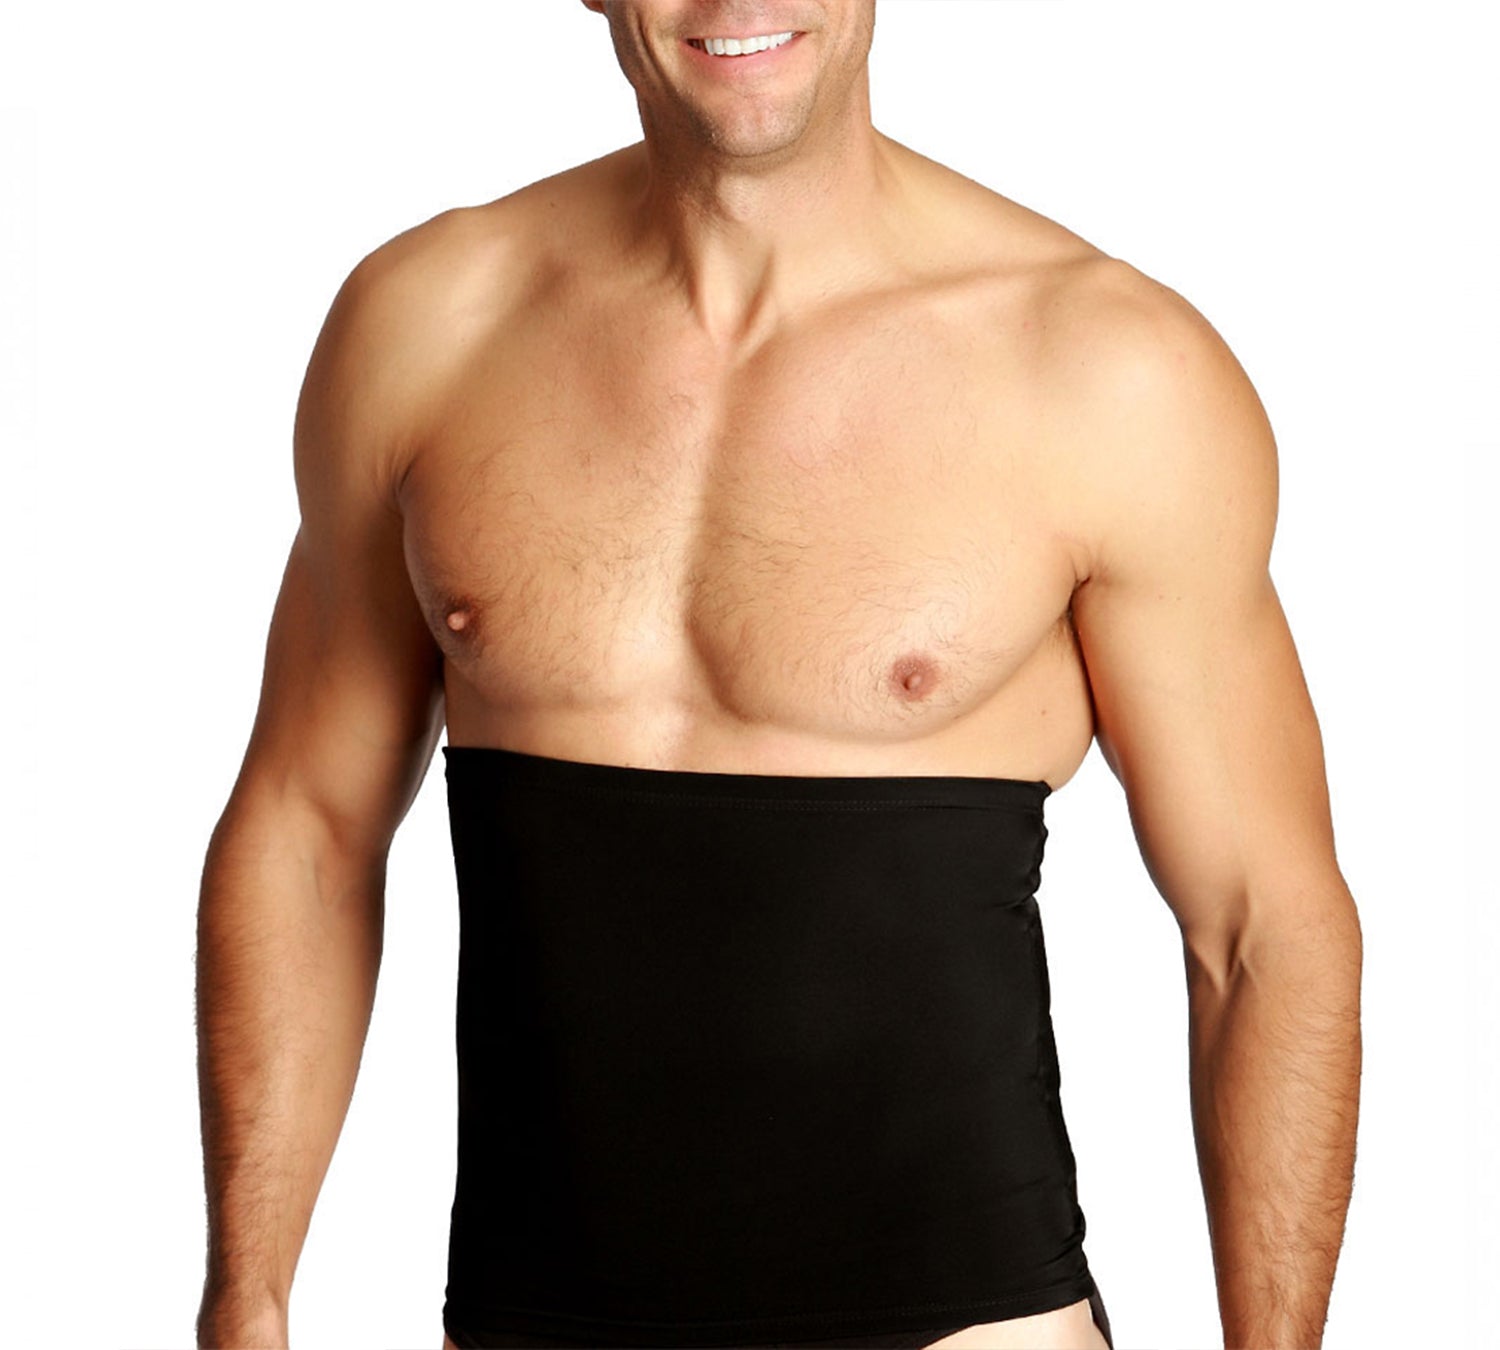 Extreme Fit Men's Core Support and Insta Trim Shapewear